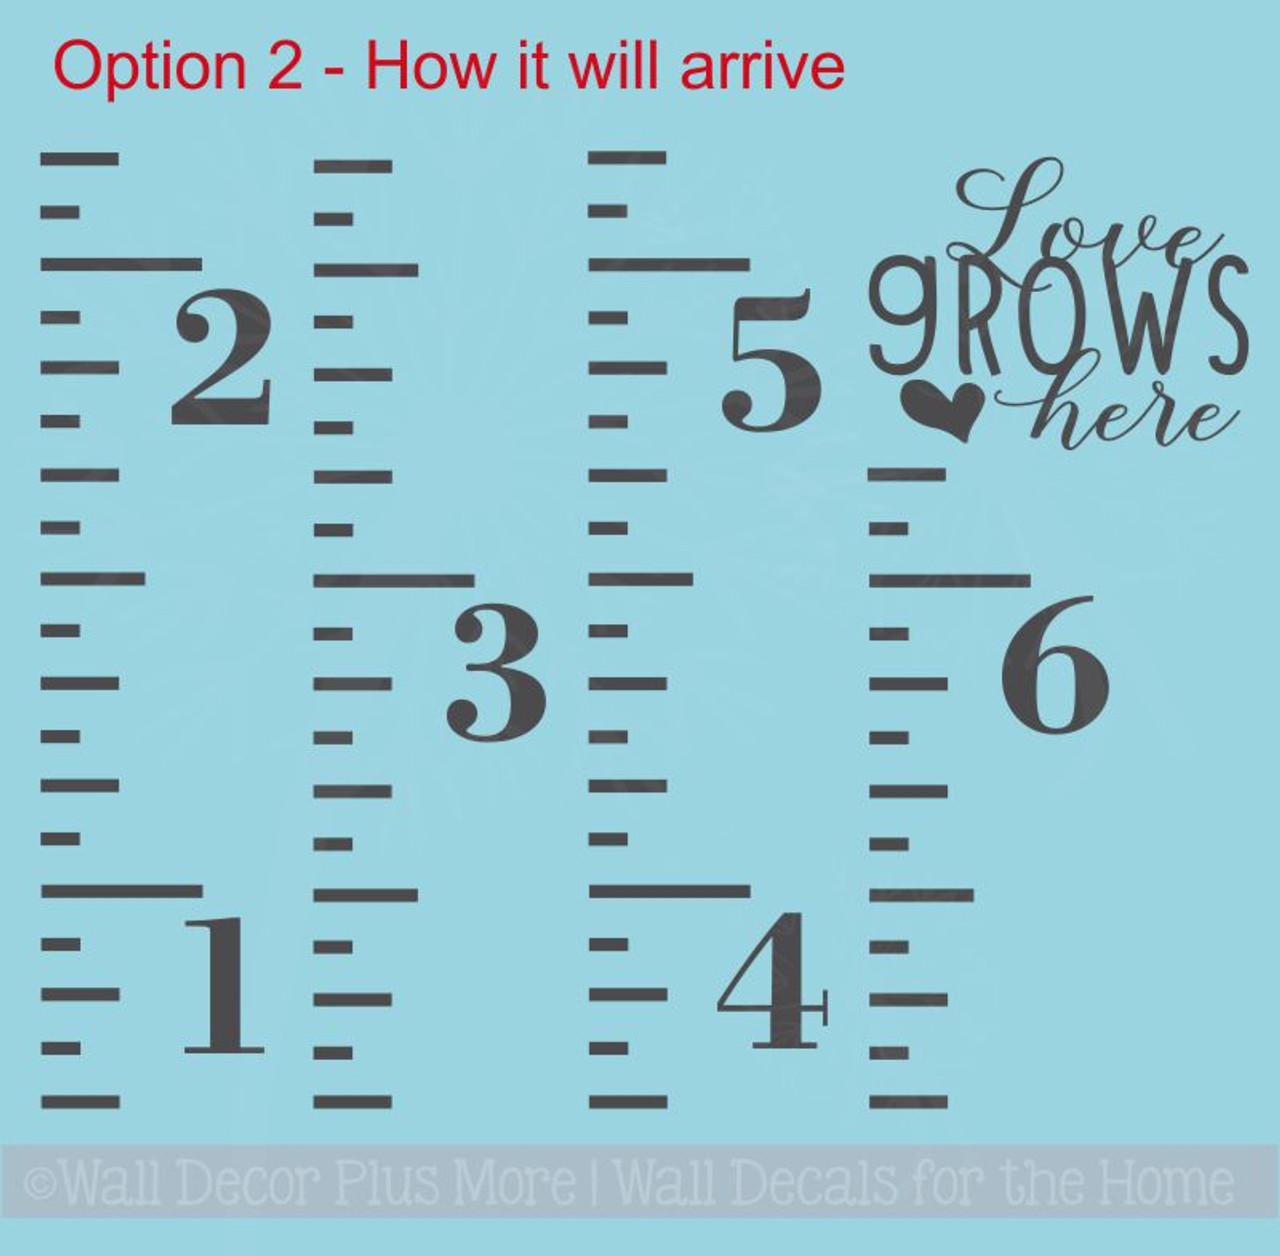 https://cdn11.bigcommerce.com/s-571px4/images/stencil/1280x1280/products/2688/13104/WD1340_Ruler_Growth_Chart_Quote_Options_Nursery_Wall_Decor_Vinyl_Sticker_Decals_Option_2__58450.1630352302.jpg?c=2